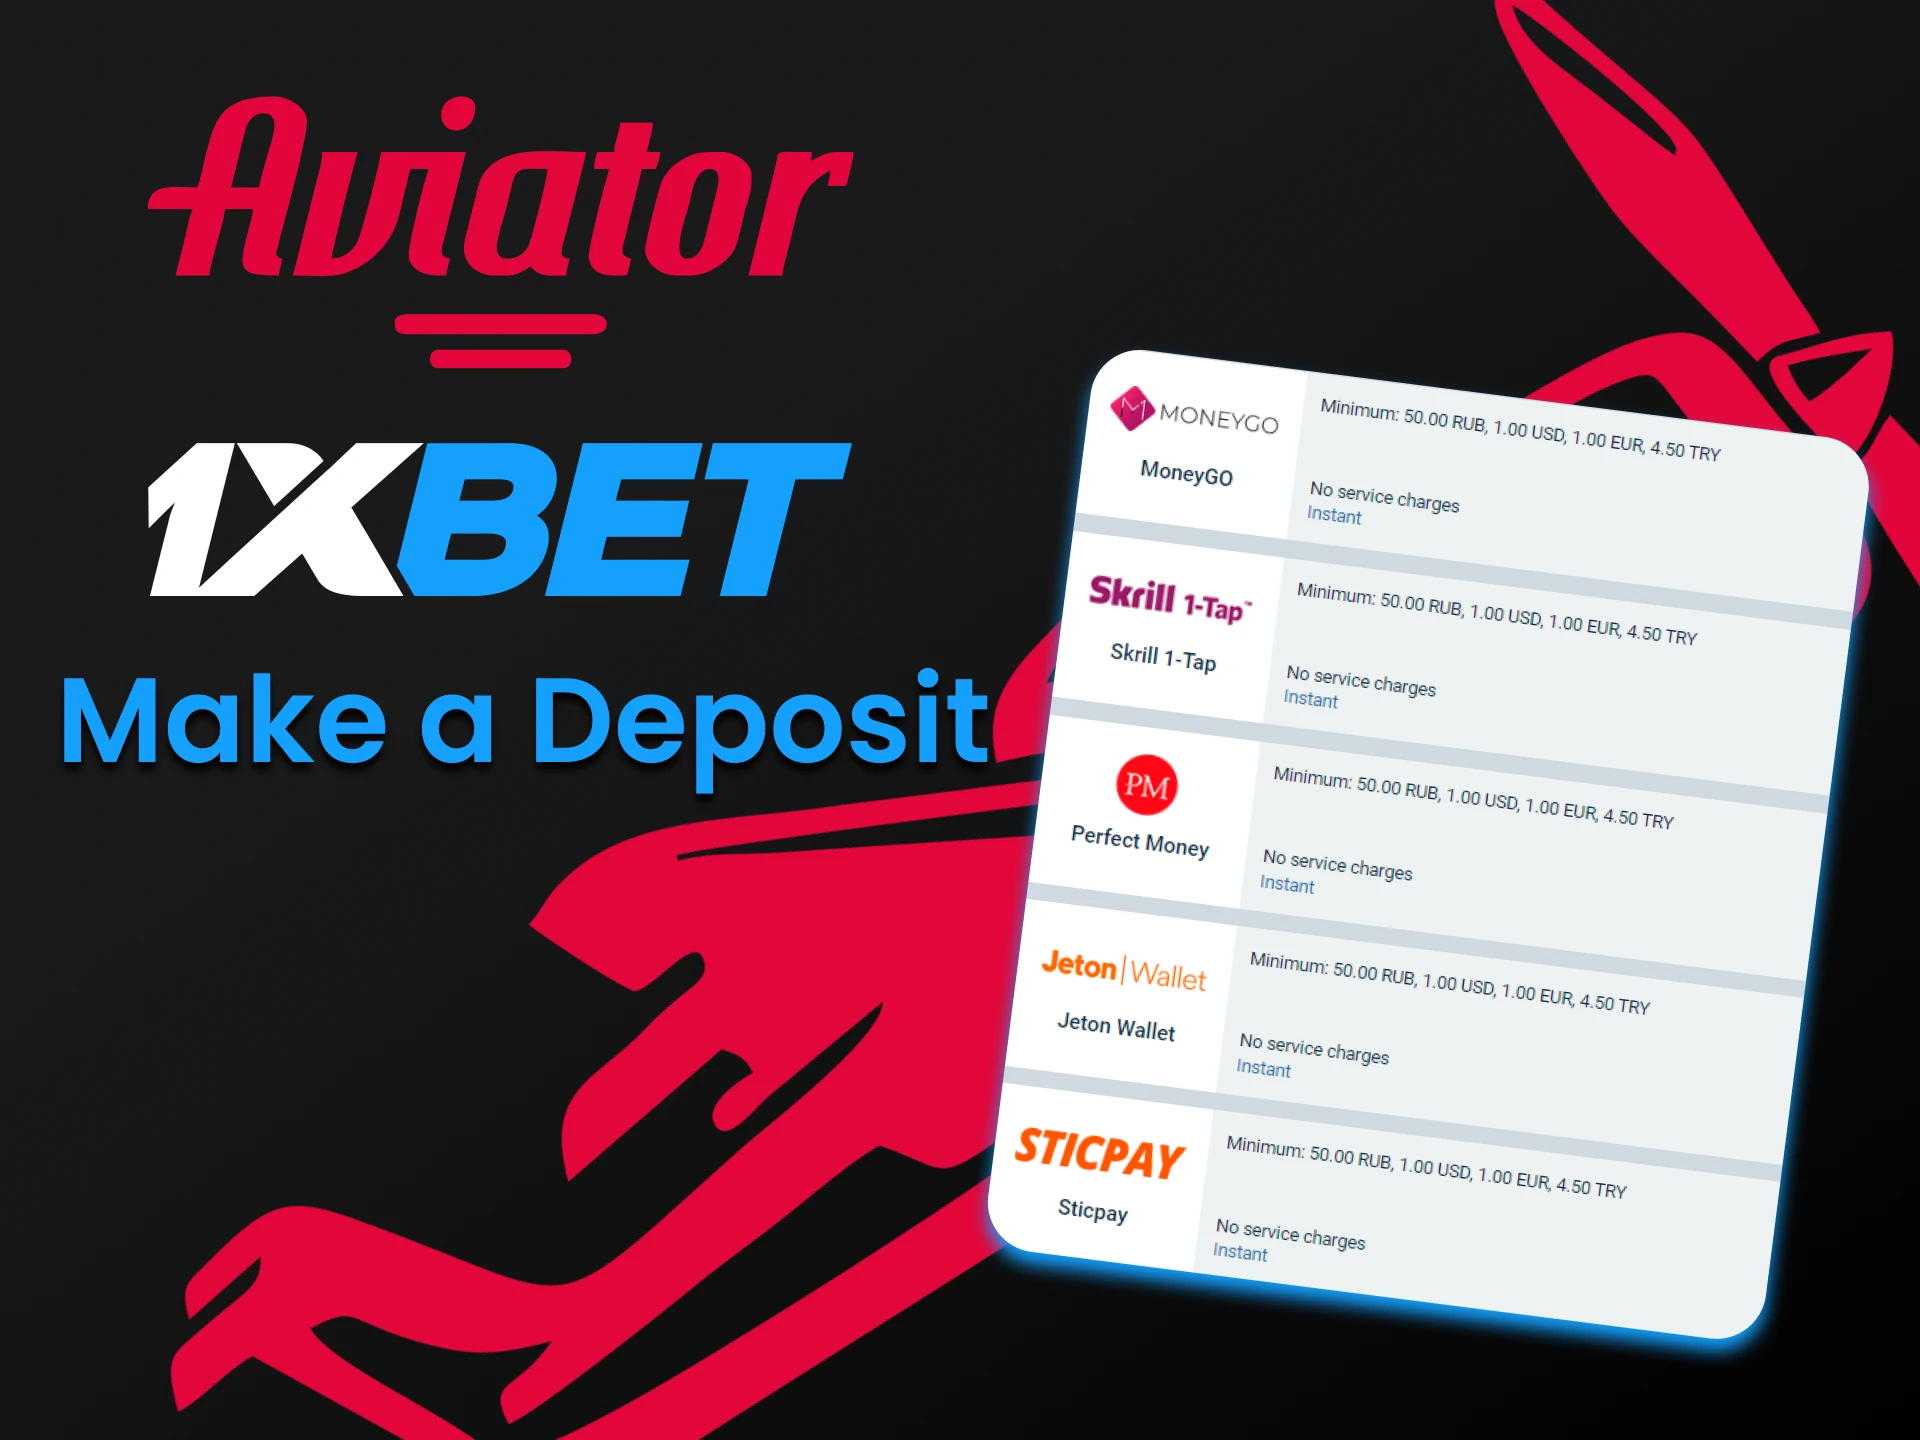 Top up your 1xbet account to play Aviator.